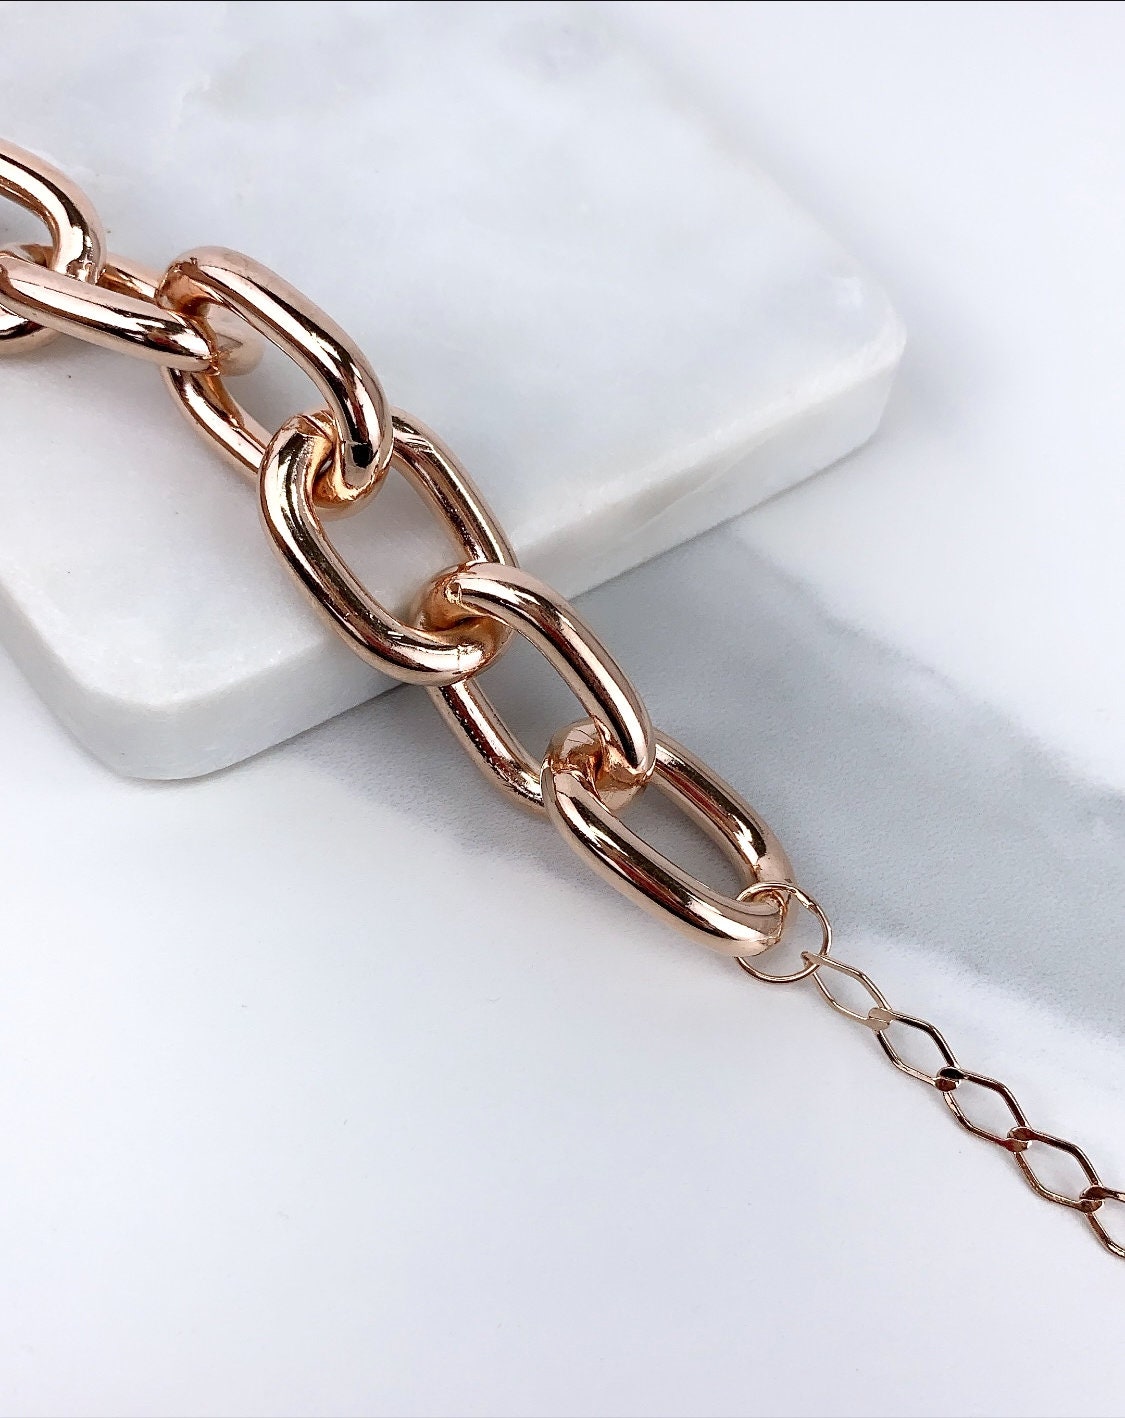 18k Rose Gold Filled 20mm Chunky Chain Choker or Bracelet, with Extender Wholesale Jewelry Making Supplies